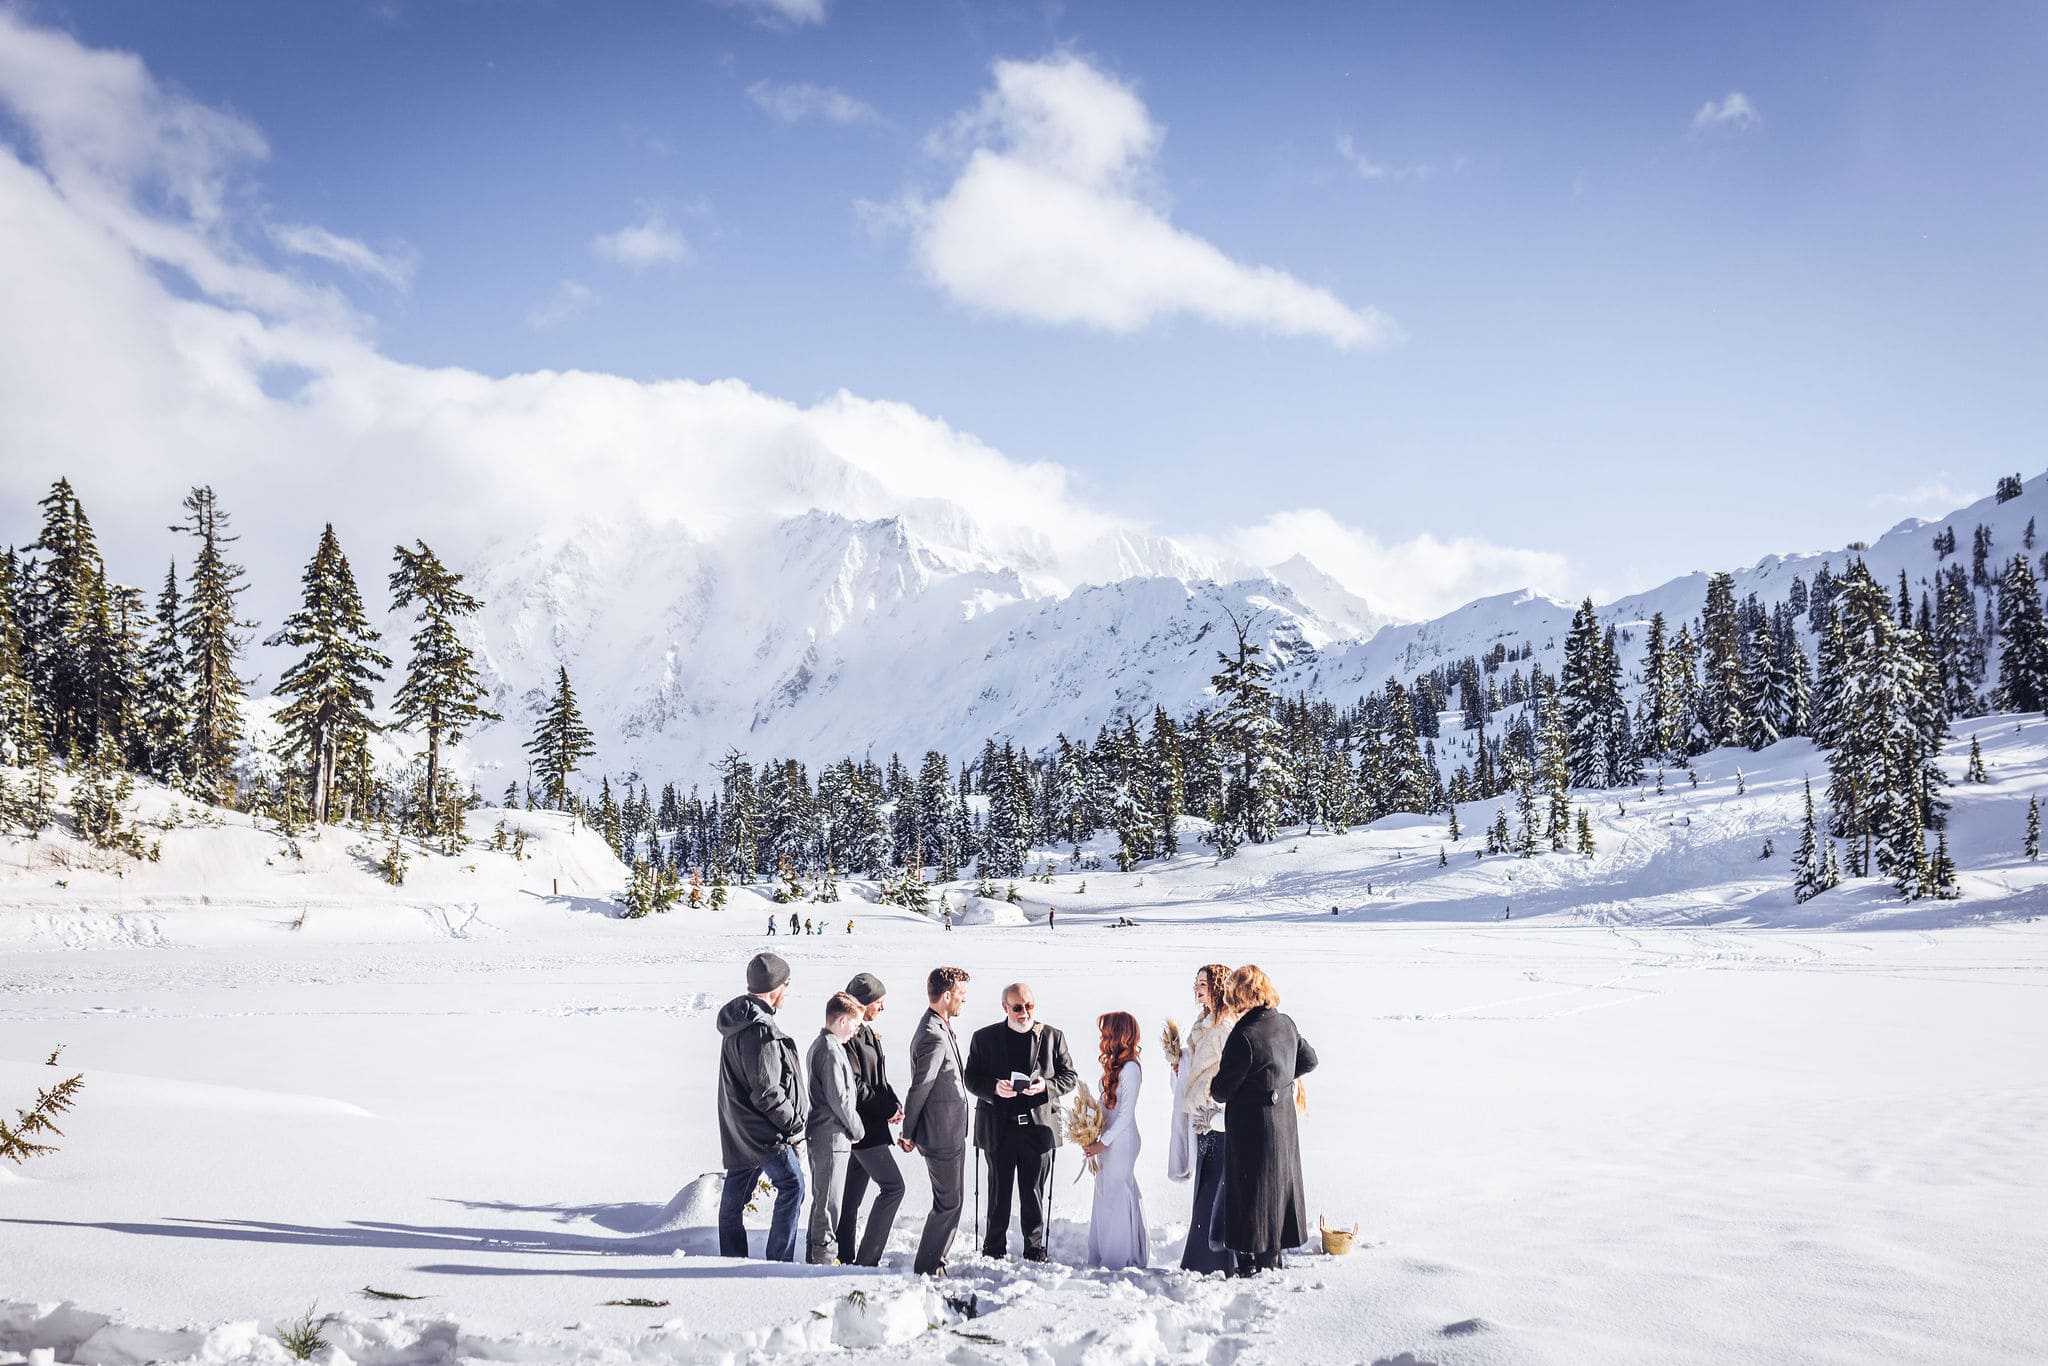 Elopement ceremony in North Cascades in Washington state